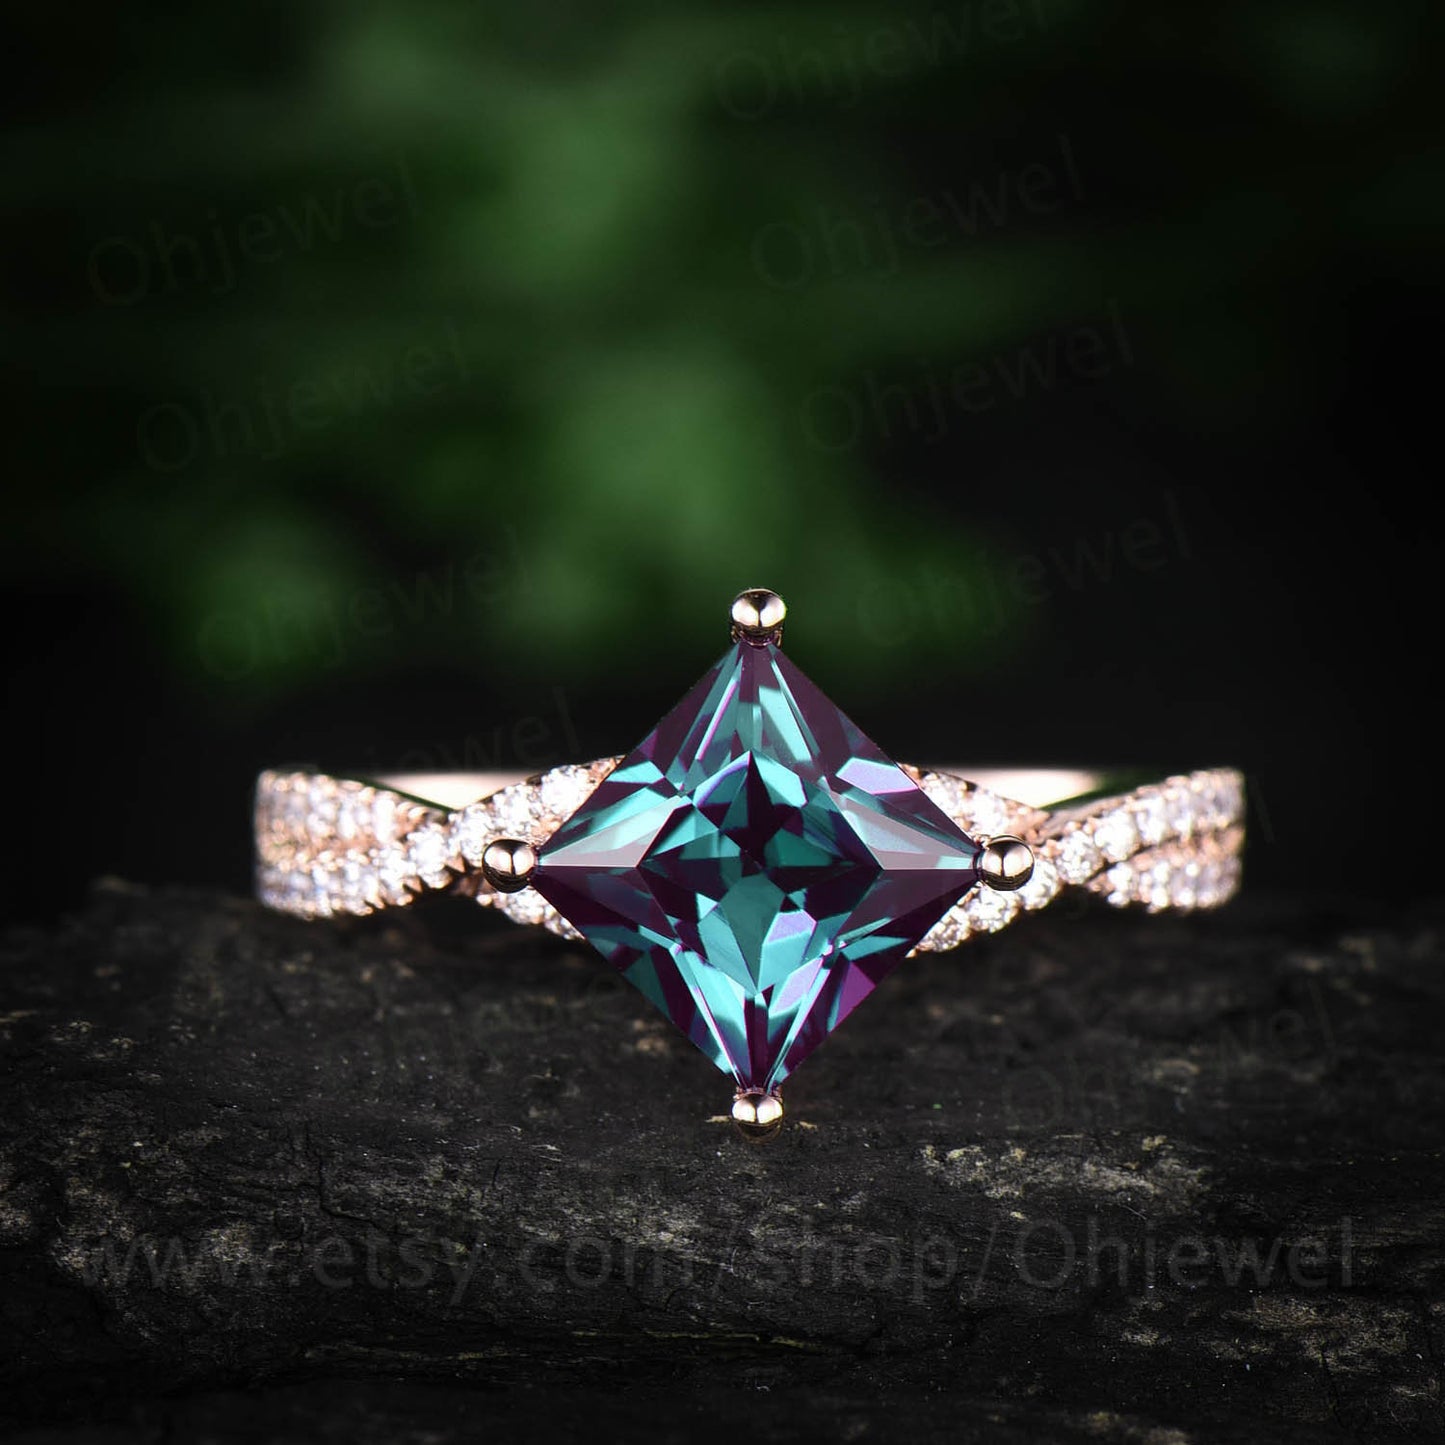 7mm Princess cut Alexandrite ring color change Alexandrite engagement ring rose gold unique twisted moissanite ring wedding anniversary gift